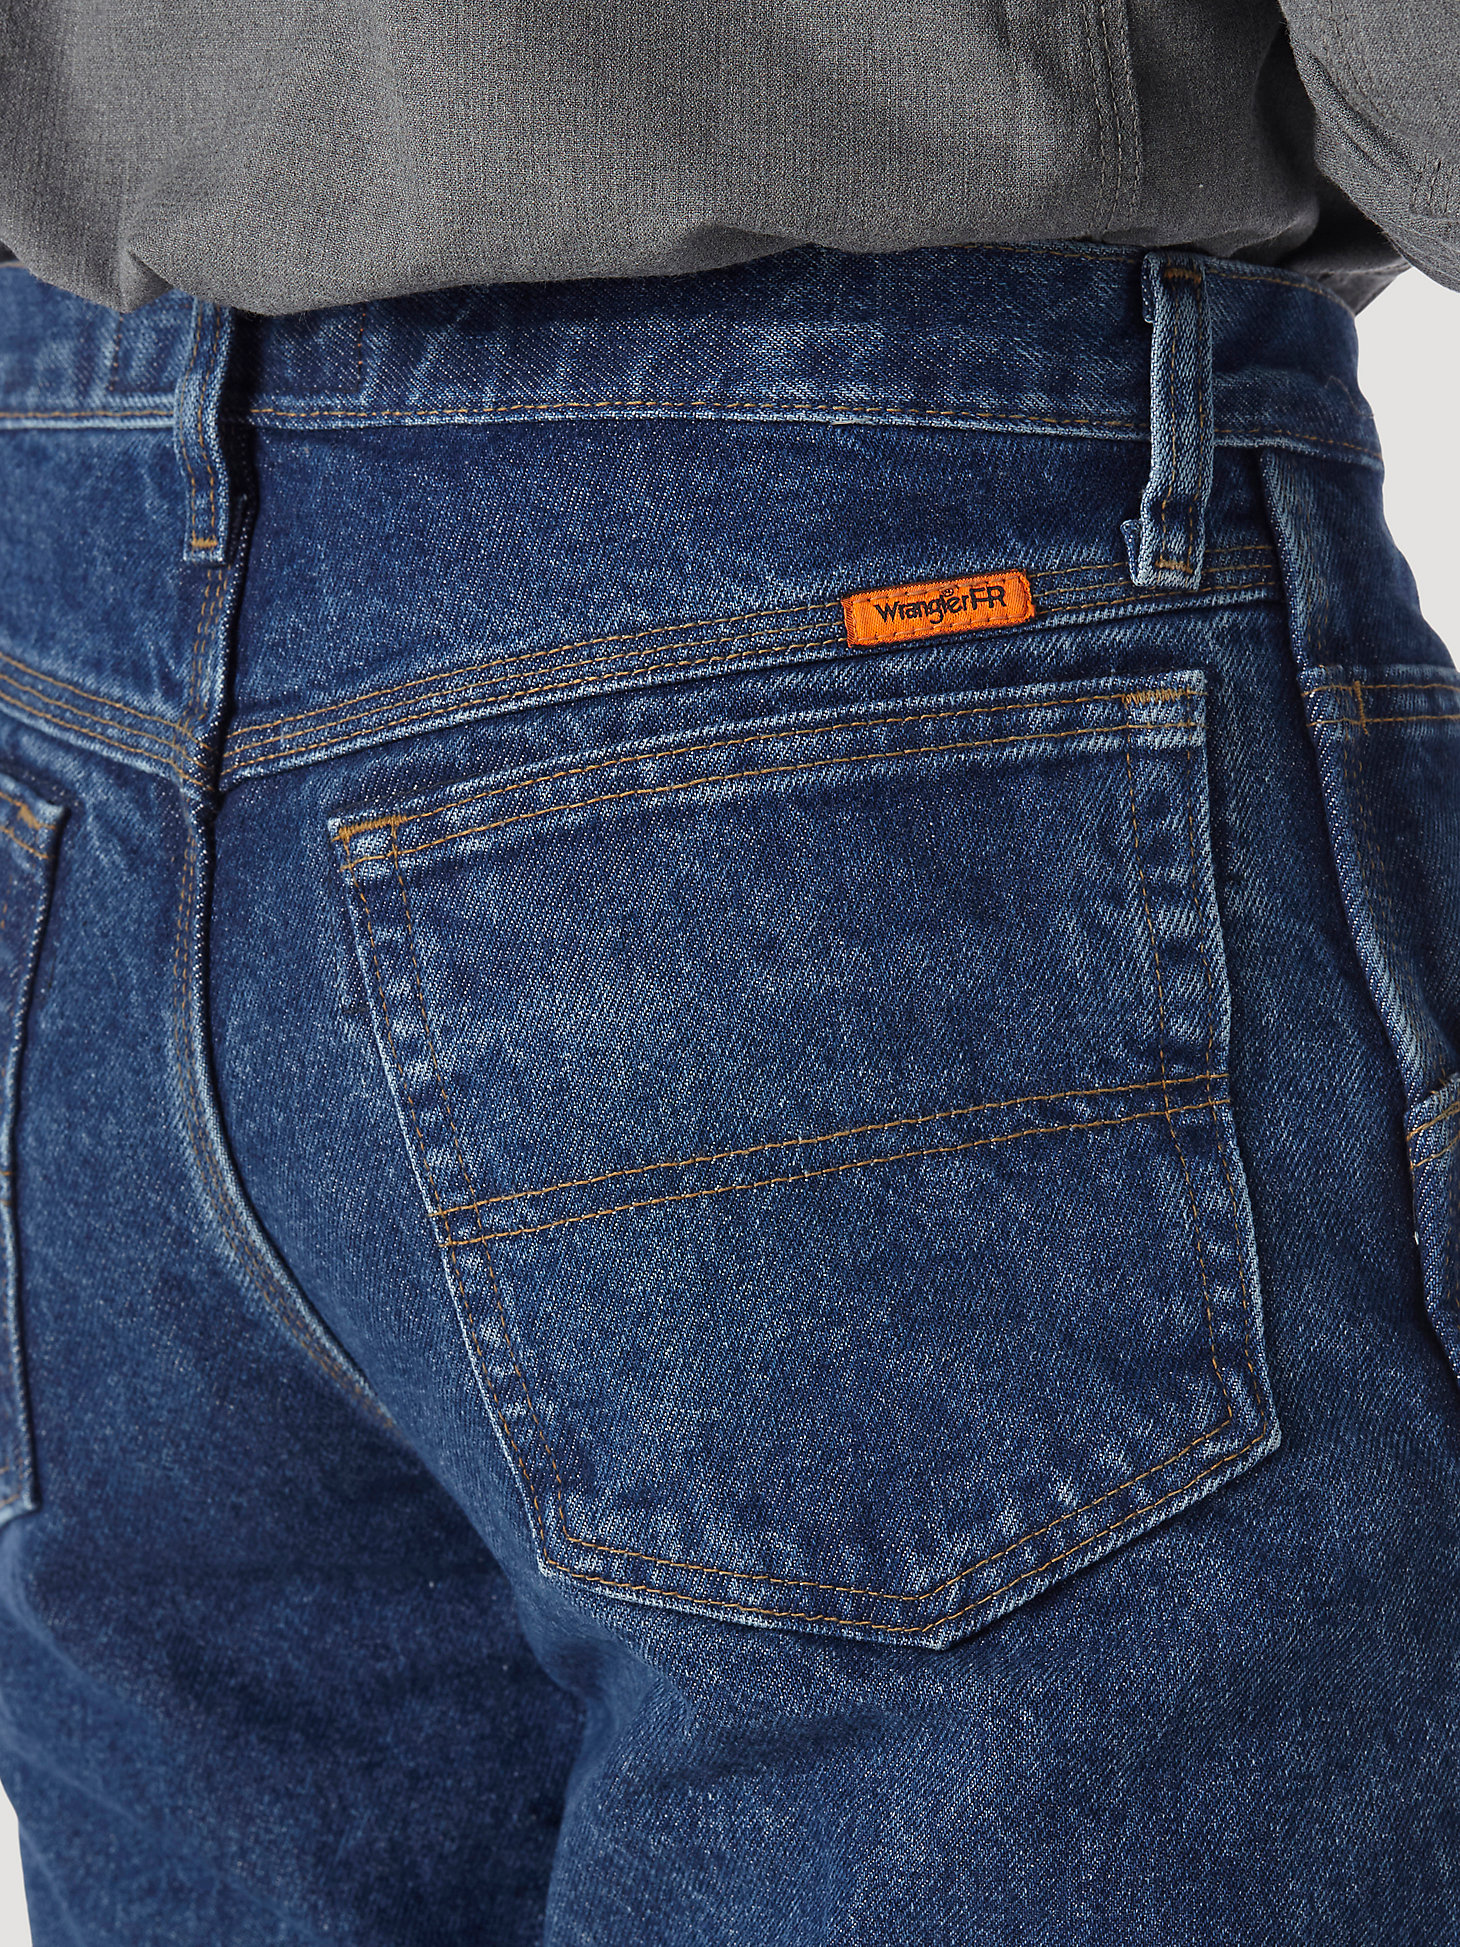 Wrangler® RIGGS Workwear® FR Flame Resistant Relaxed Fit Jean in FLAME RESISTANT alternative view 4